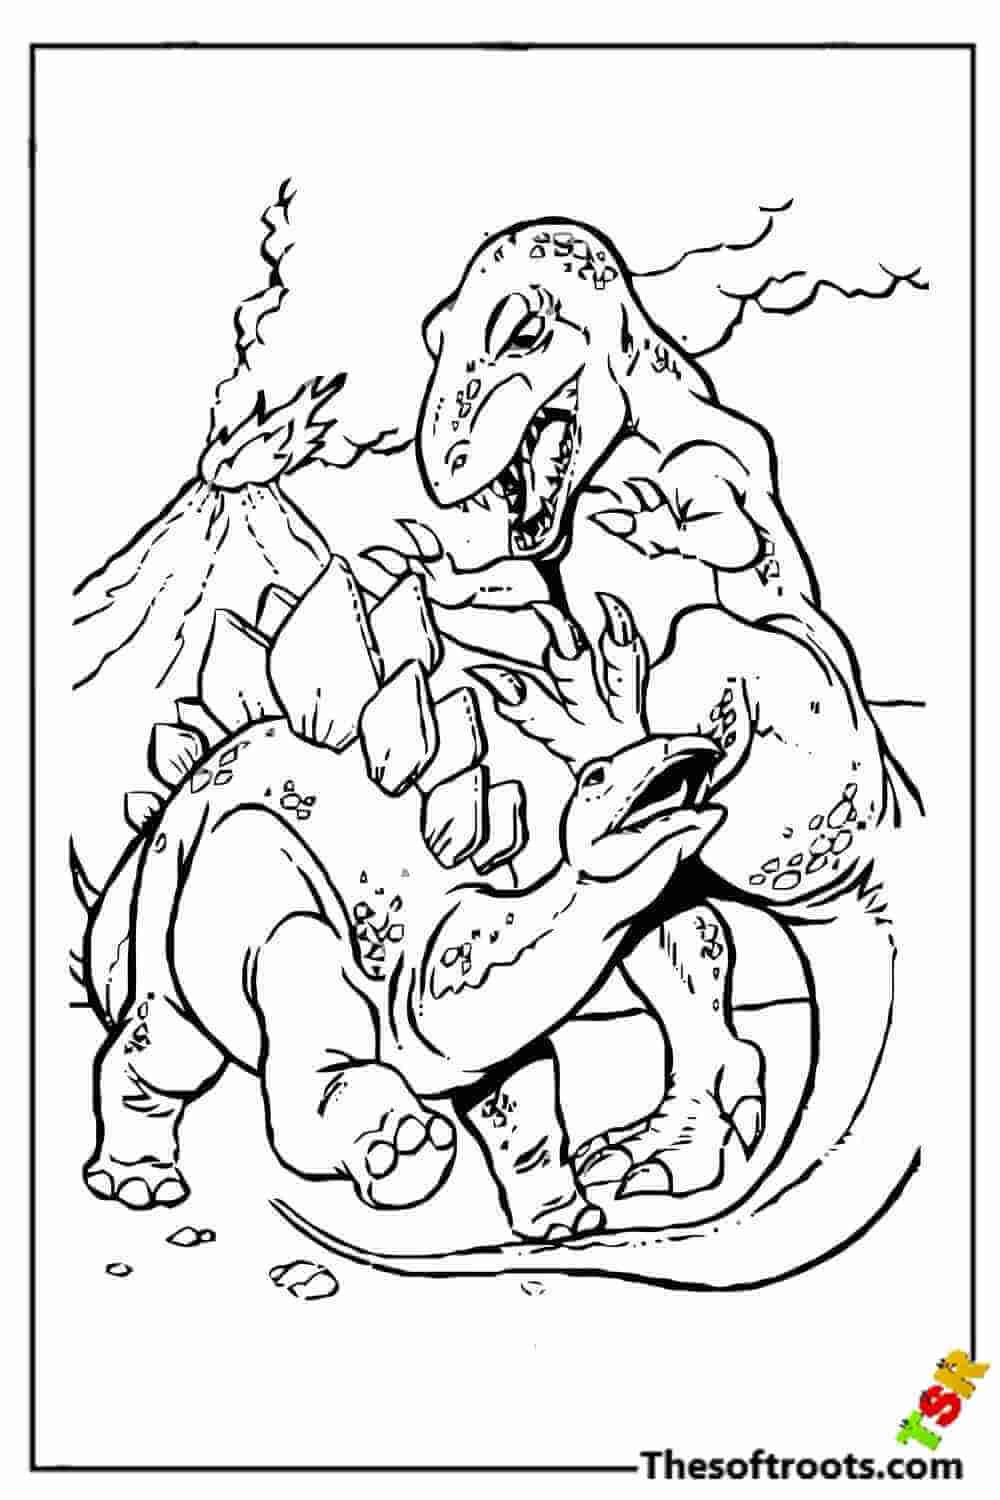 T-Rex Fight coloring pages